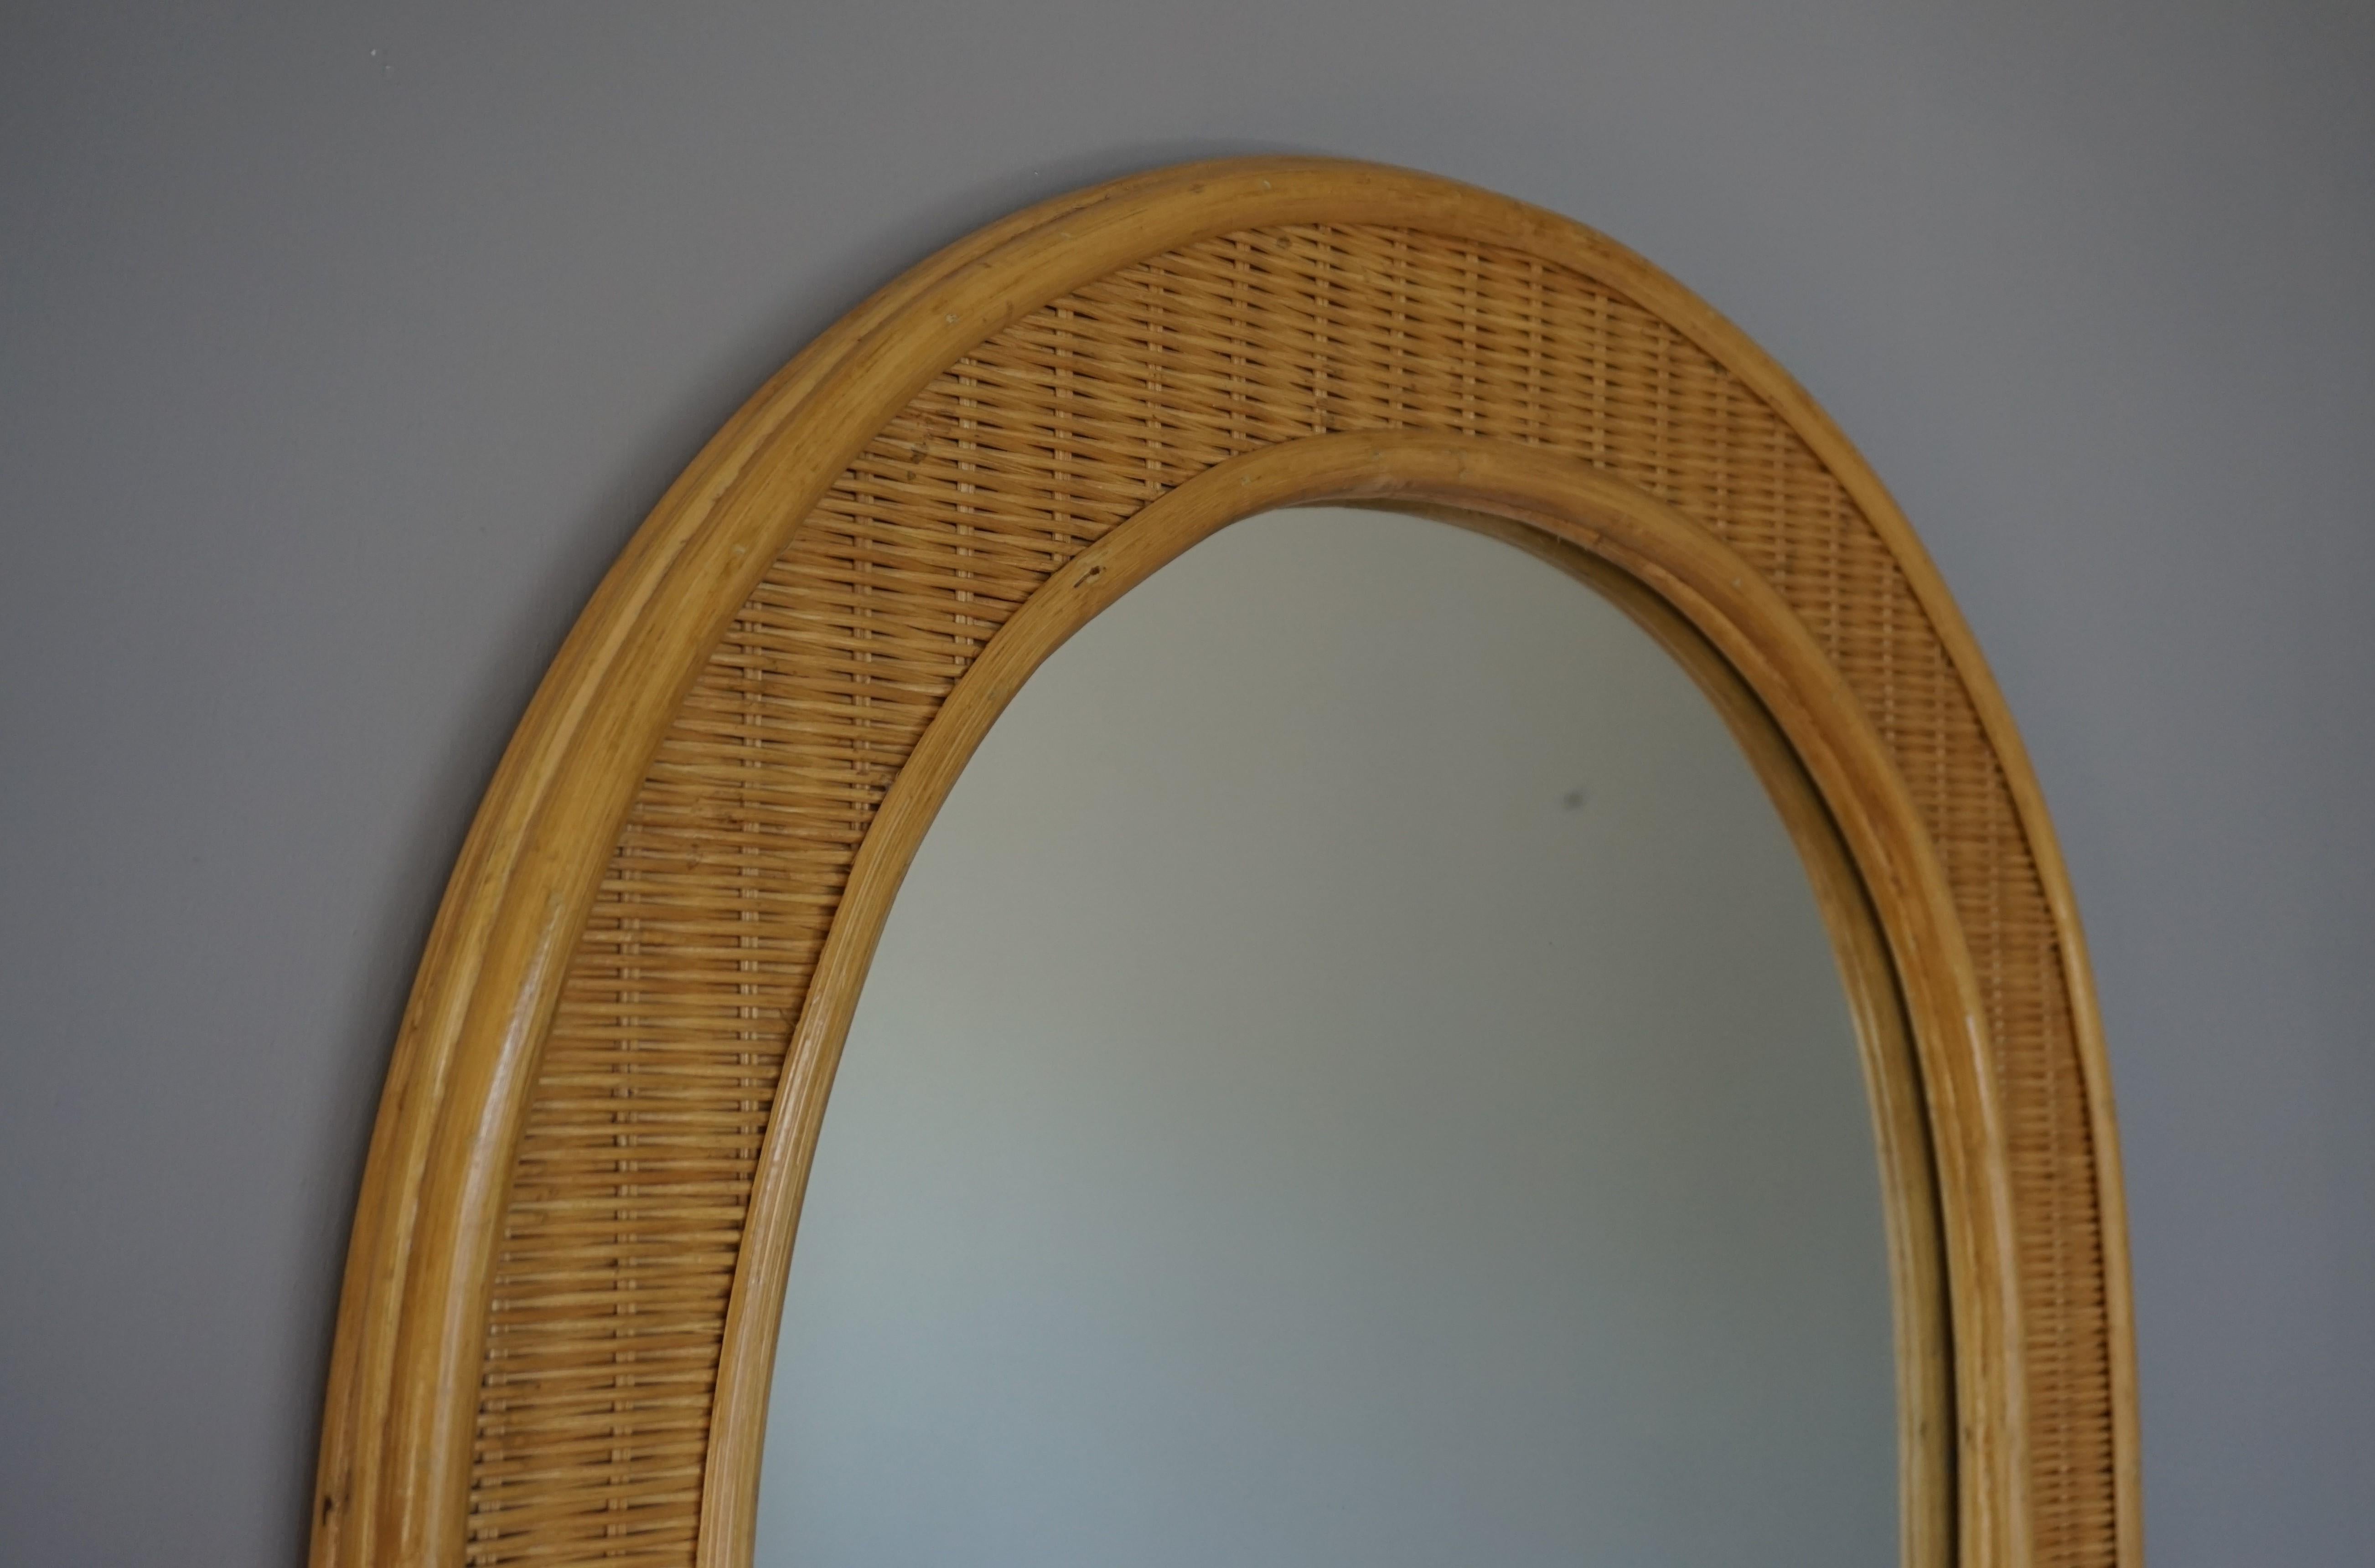 Rare and Handcrafted Midcentury Organic Rattan and Wicker Frame Wall Mirror 1970 In Excellent Condition For Sale In Lisse, NL